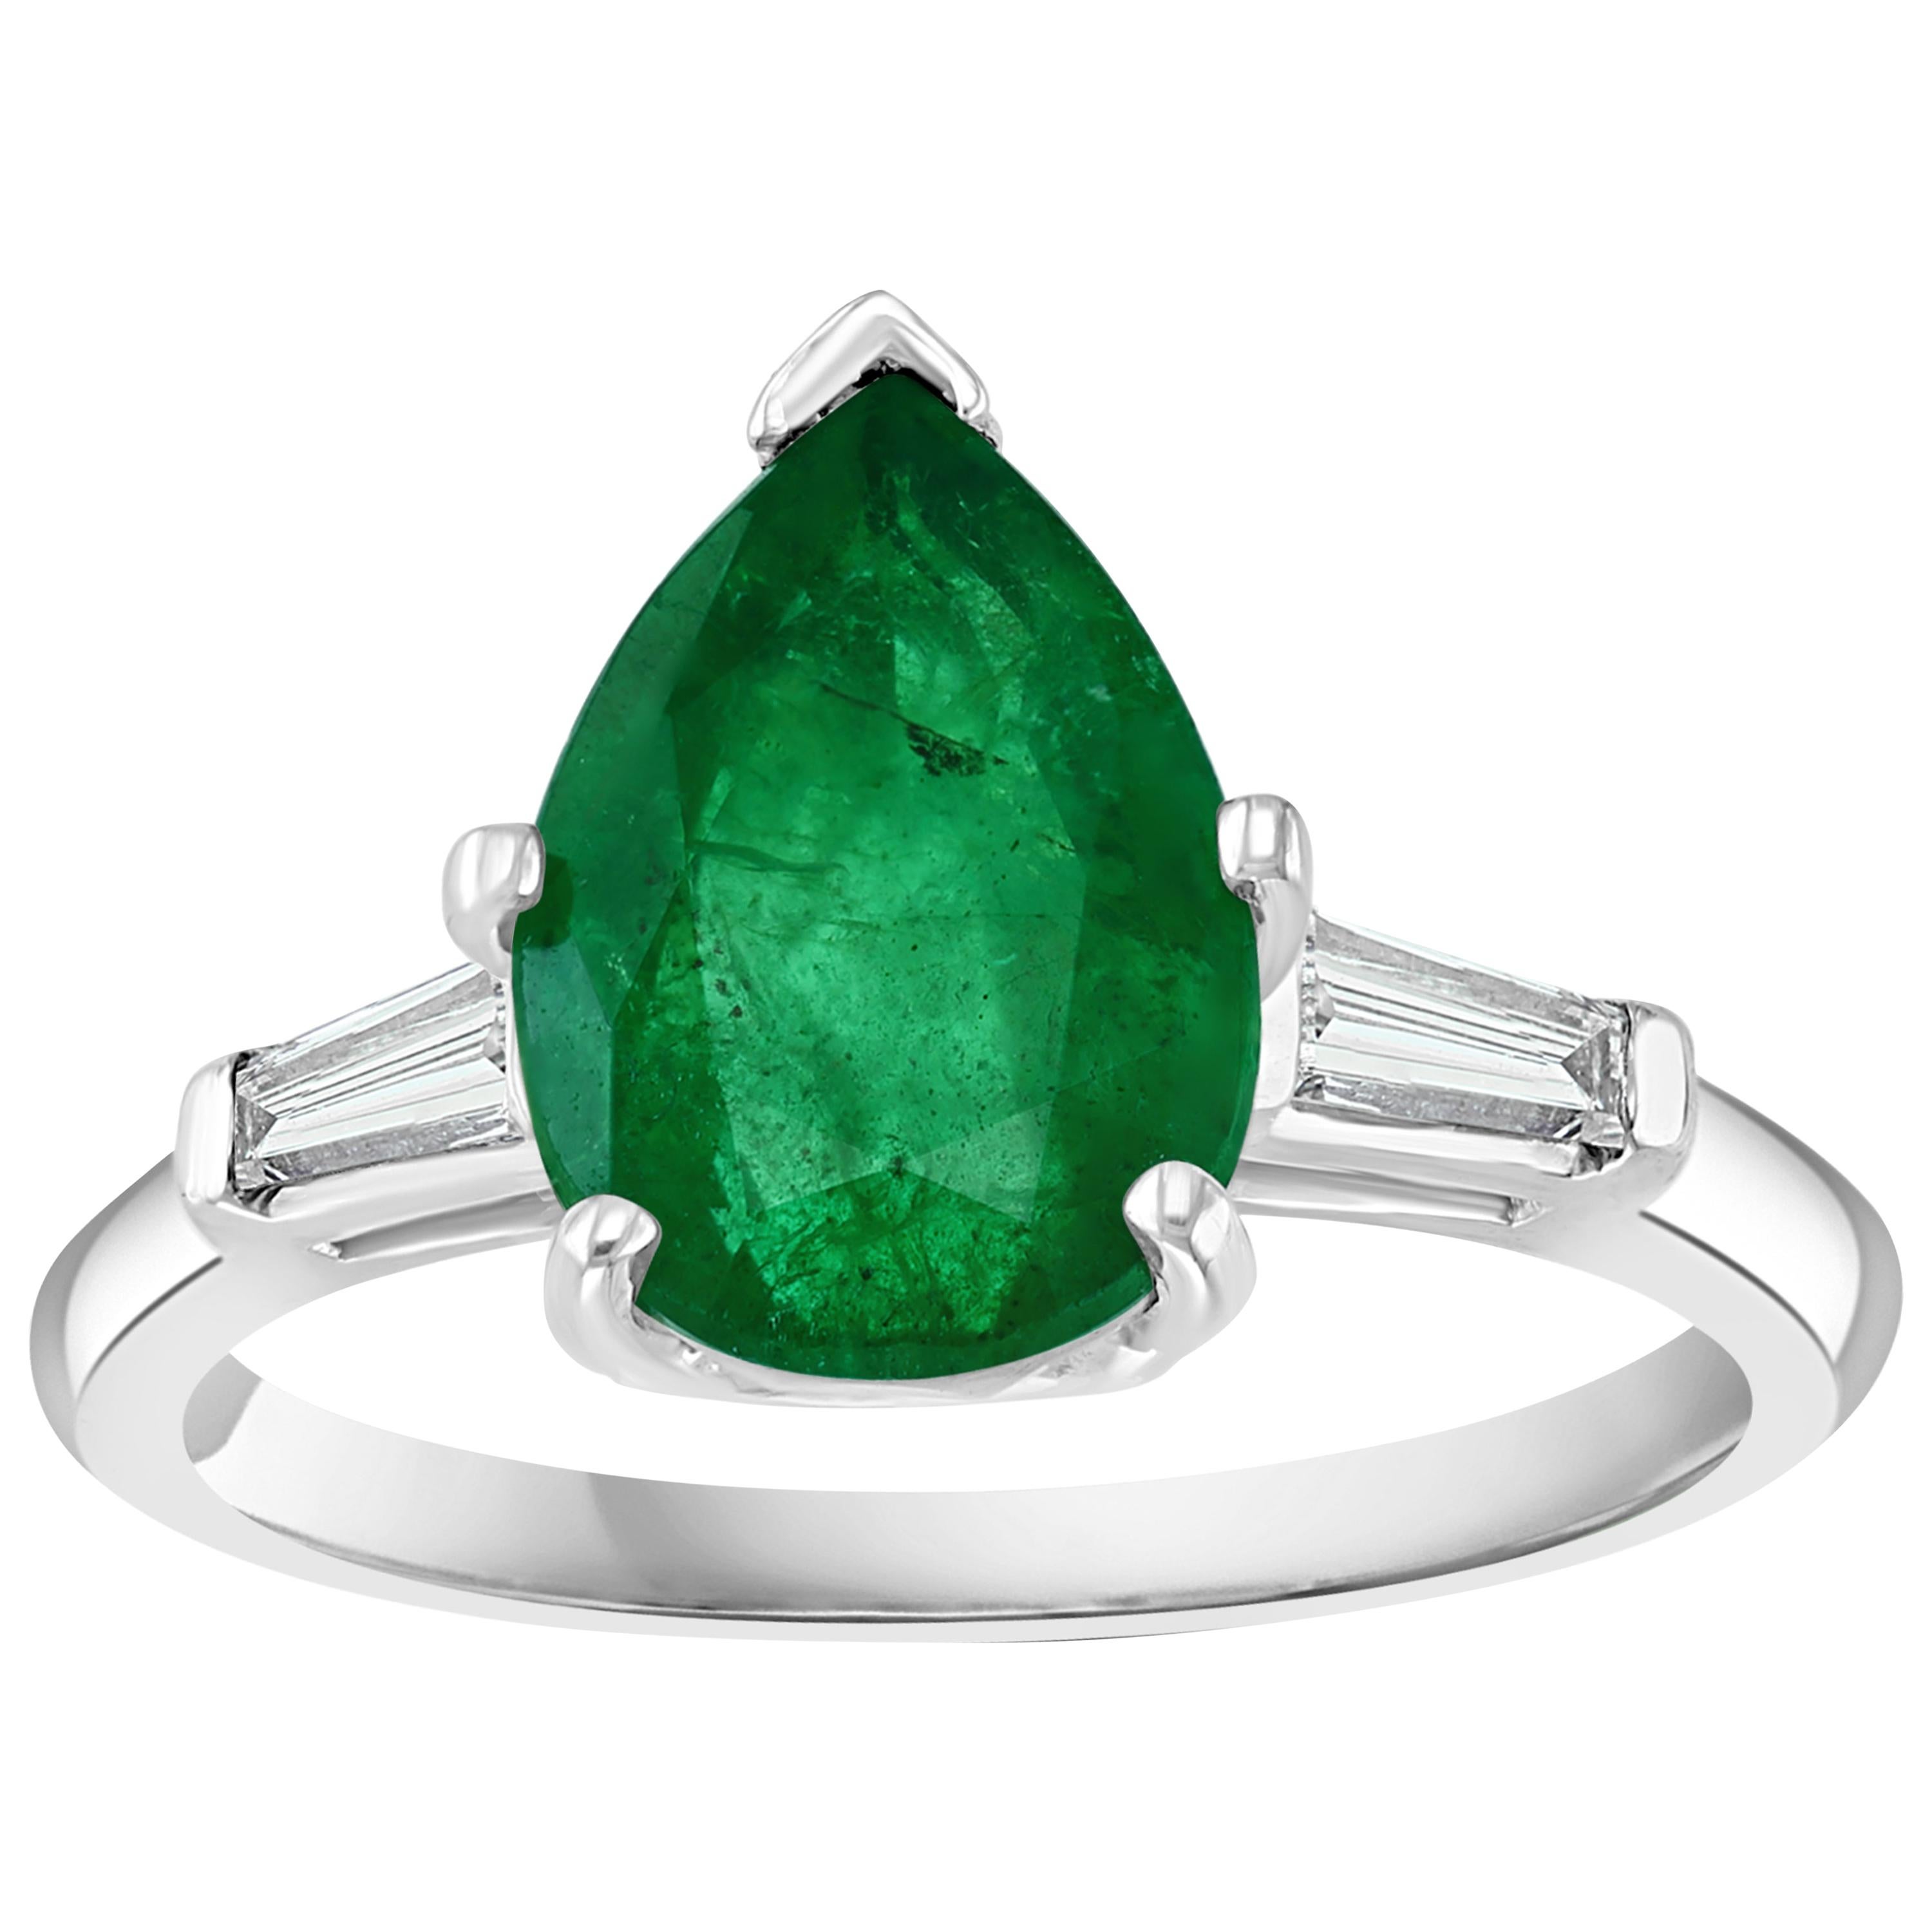 3.5 Carat Pear Cut Emerald and Diamond Ring 14 Karat White Gold For Sale